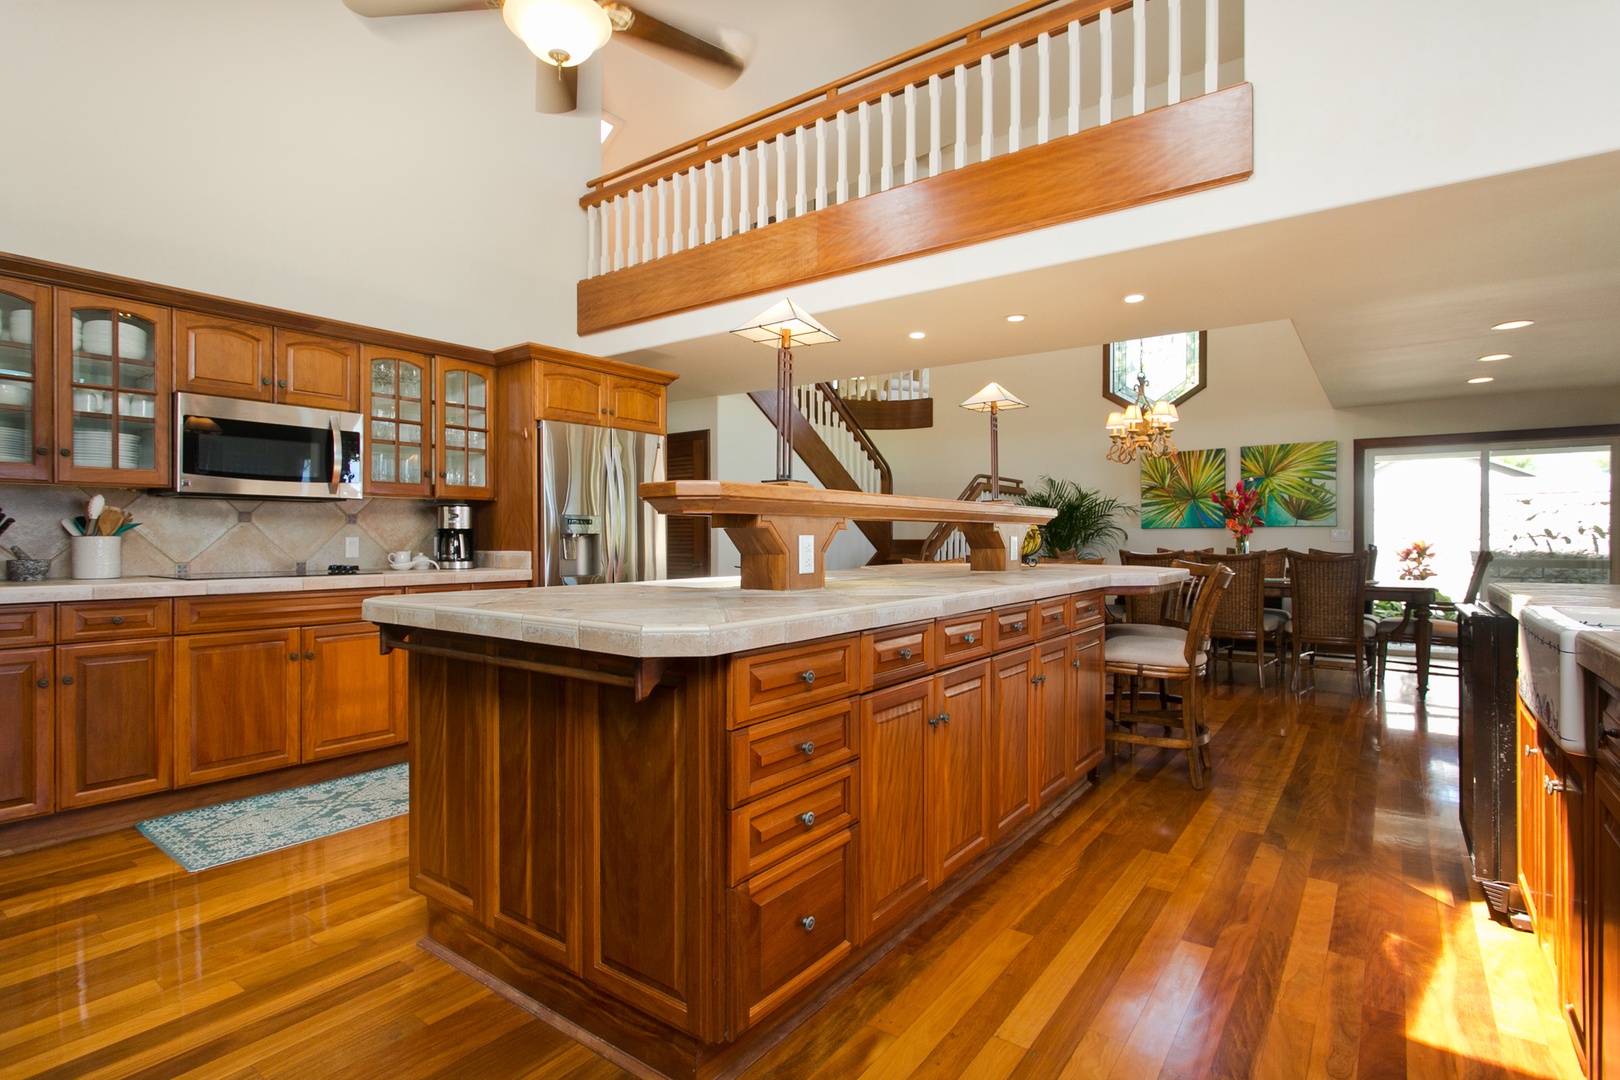 Kailua Vacation Rentals, Hale Melia* - Craft your favorite dishes in a gourmet kitchen designed with rich wood finishes and ample space.